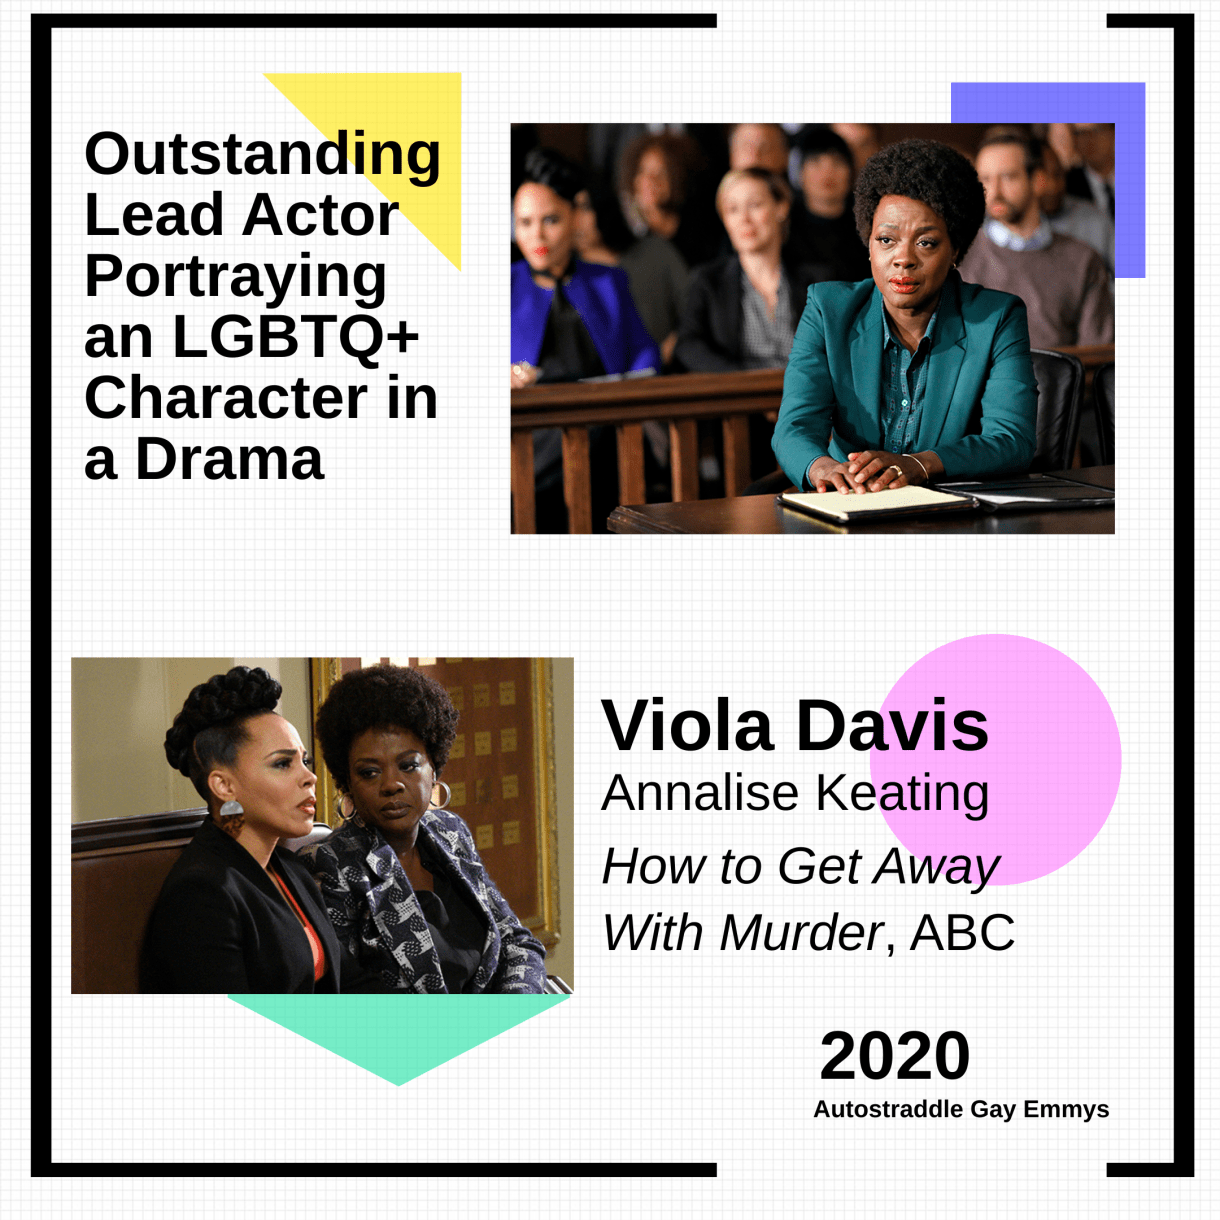 Graphic announcing Outstanding Lead Actor Portraying an LGBTQ+ Character in a Drama winner is Viola Davis as Annalise Keating, How to Get Away With Murder